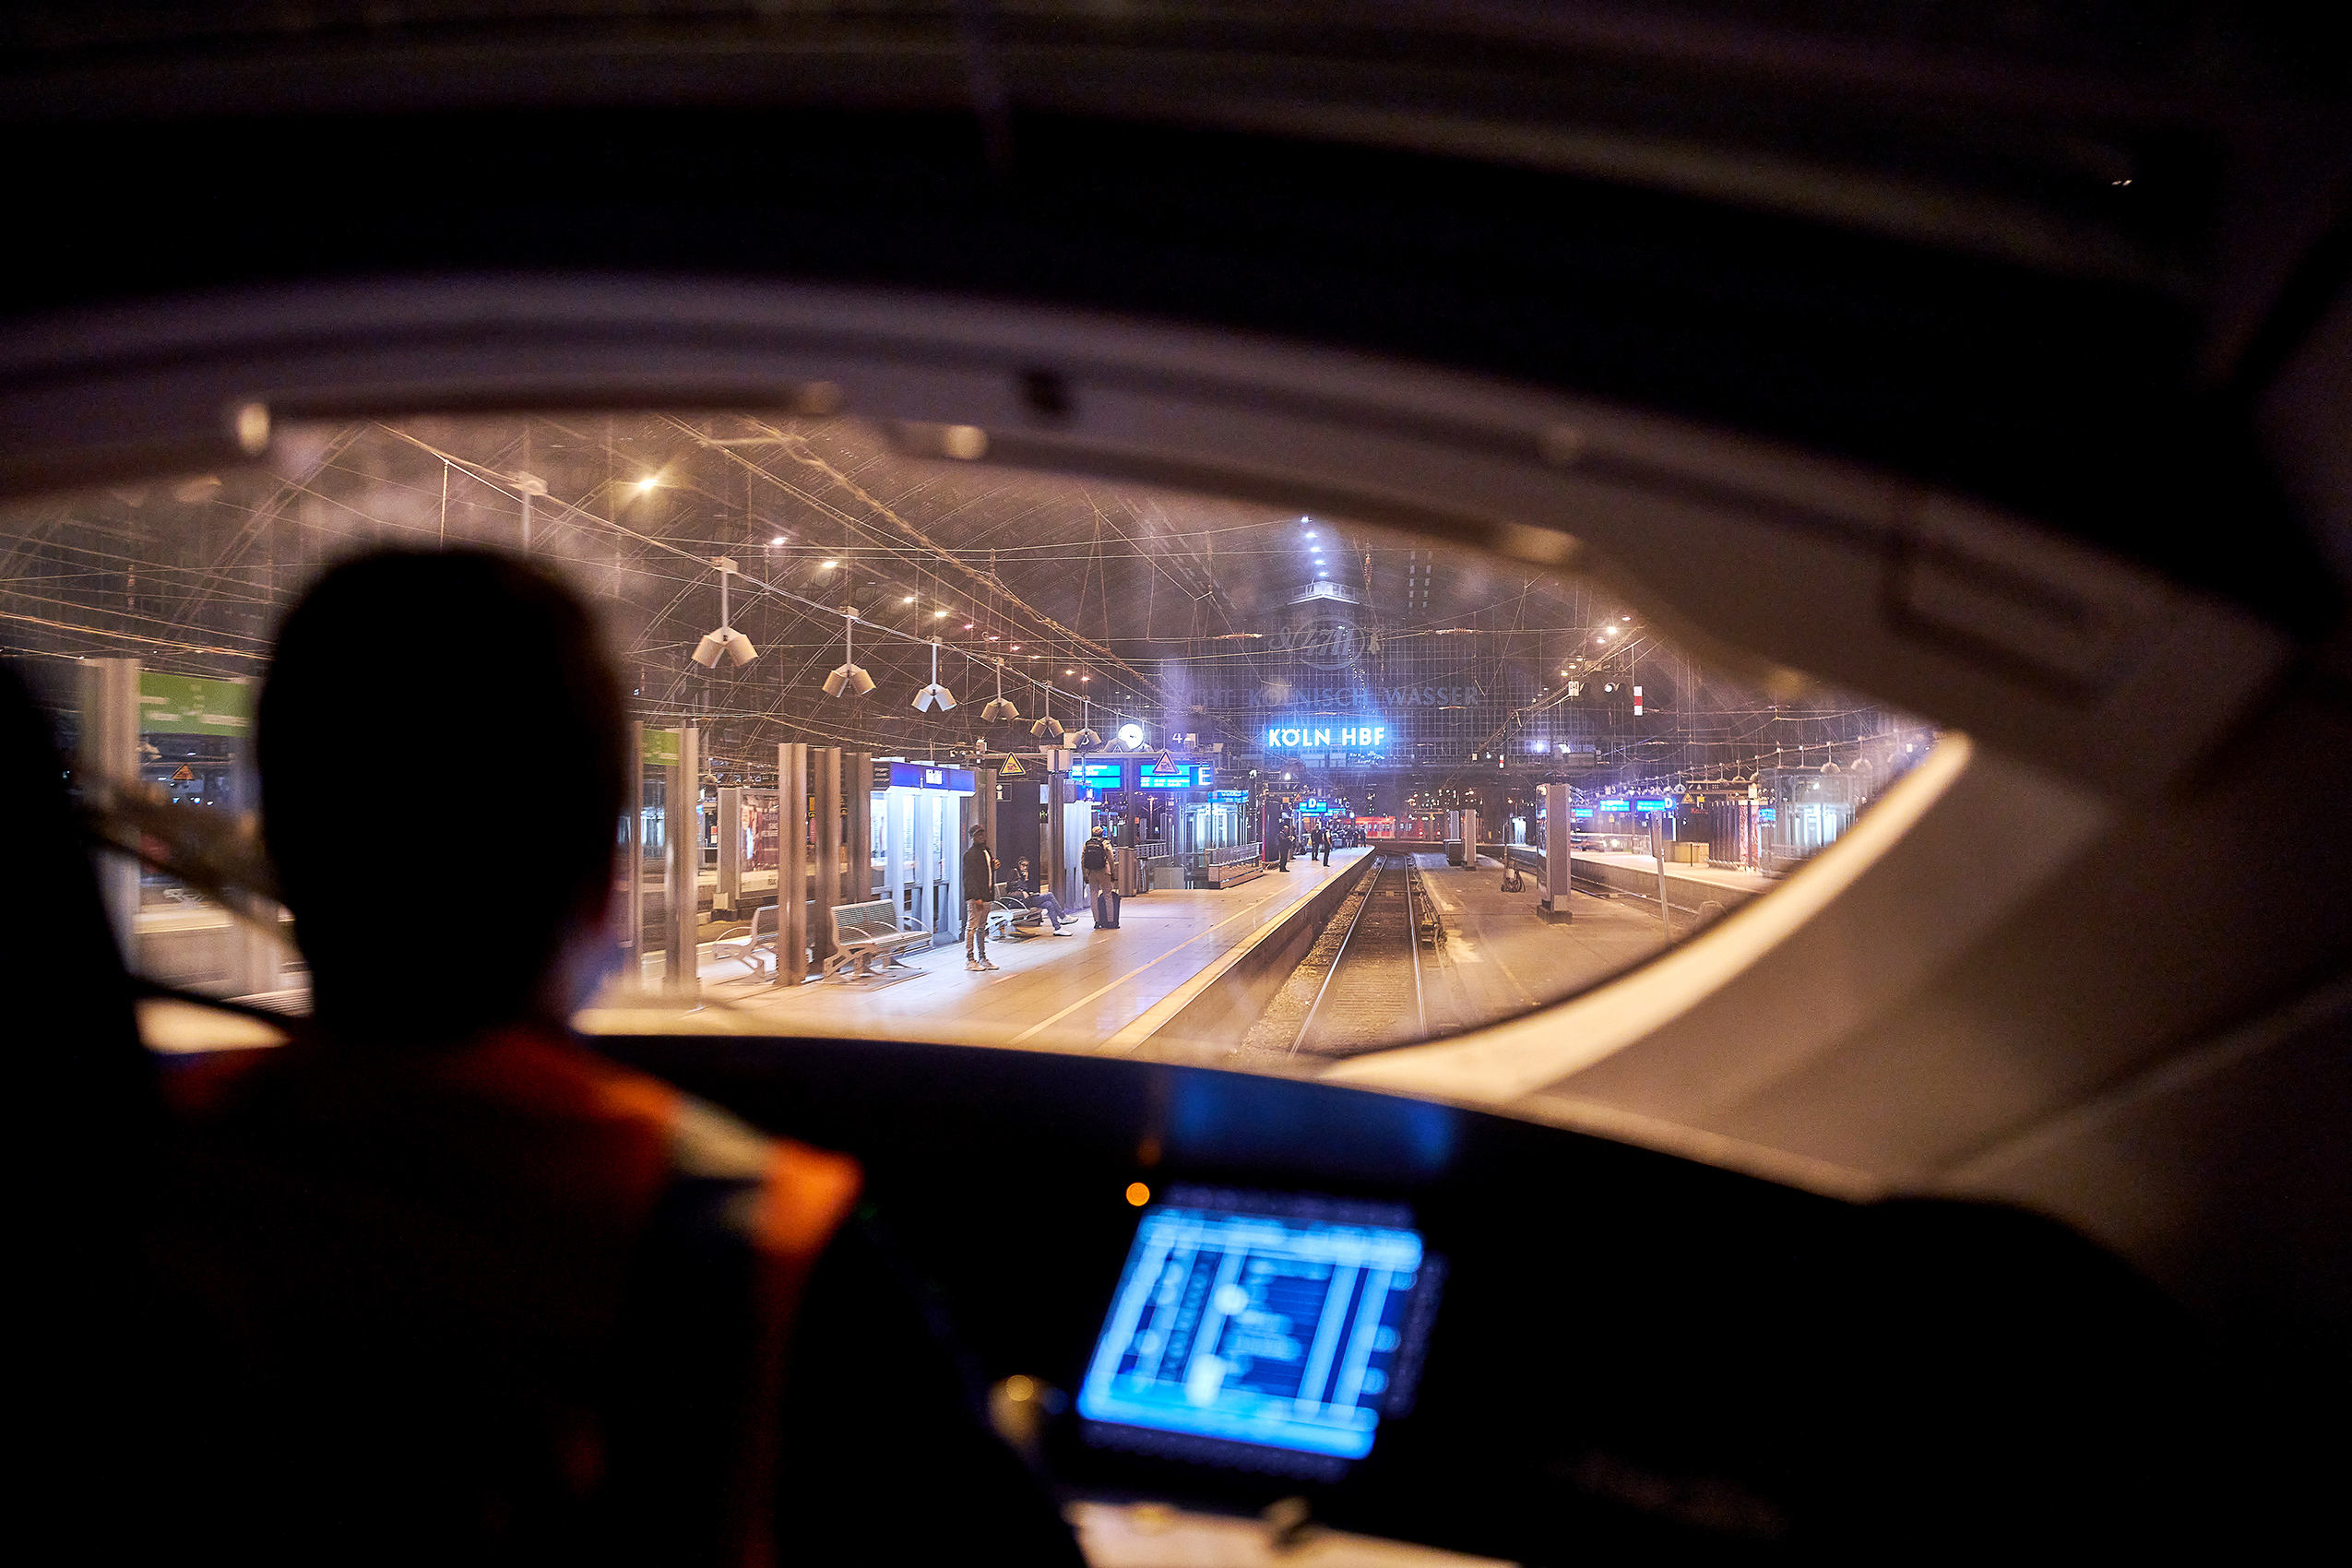 A train runner drives the first ICE to Cologne’s main station shortly after 3 am. Passengers are already waiting to board.